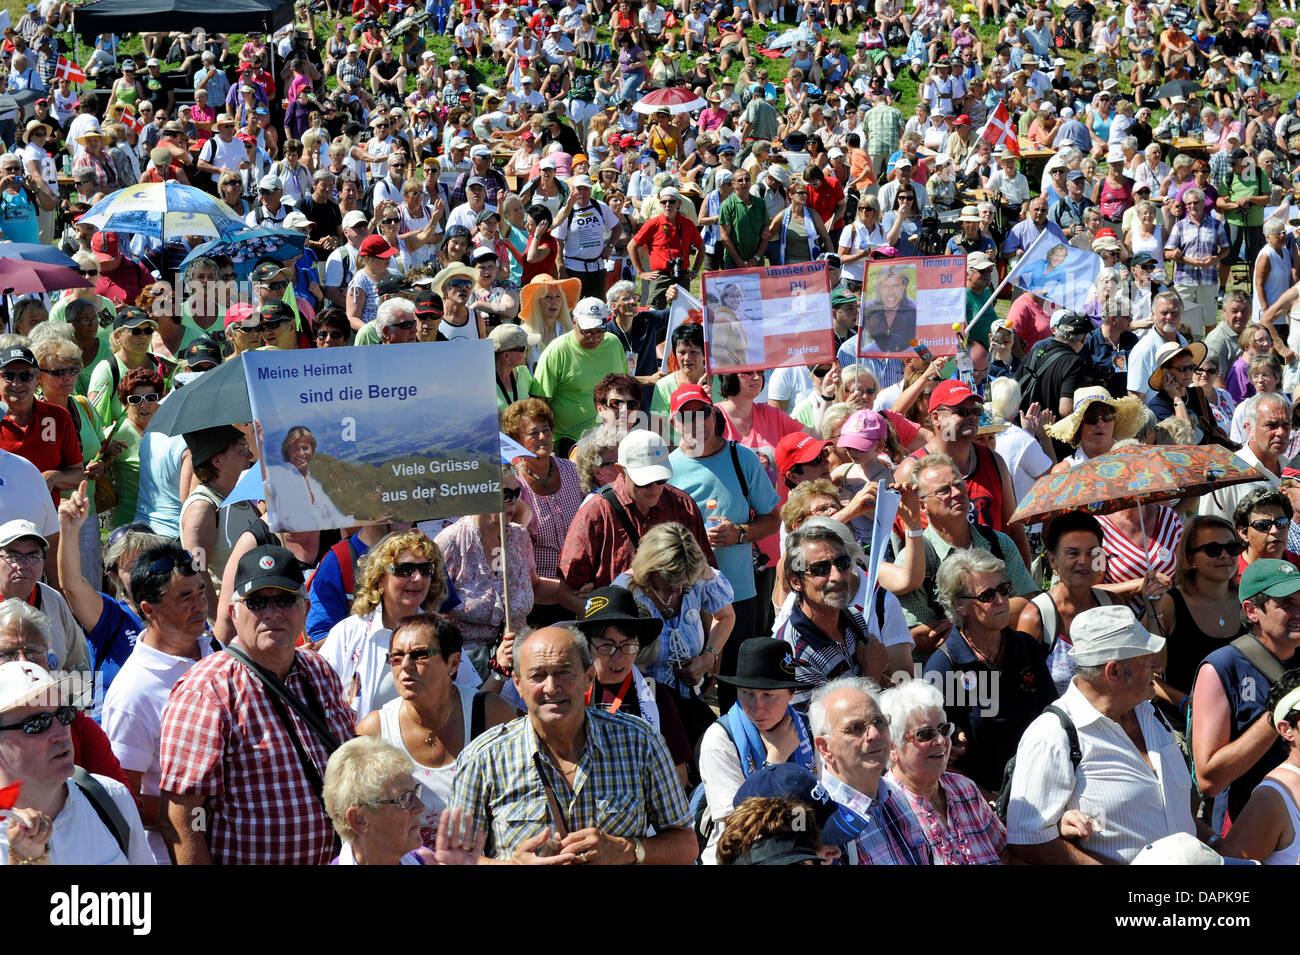 Fans of folk musician Hansi Hinterseer wait for their idol at the summit station of the Hahnenkamm rail in Kitzbuehel, Austria, 25 August 2011. Traditionally, each August hundreds of fans take a hike with Hansi Hinterseer from the final stop of the Hahnenkamm rail to Ehrenbachhoehe. Photo: Ursula Dueren Stock Photo